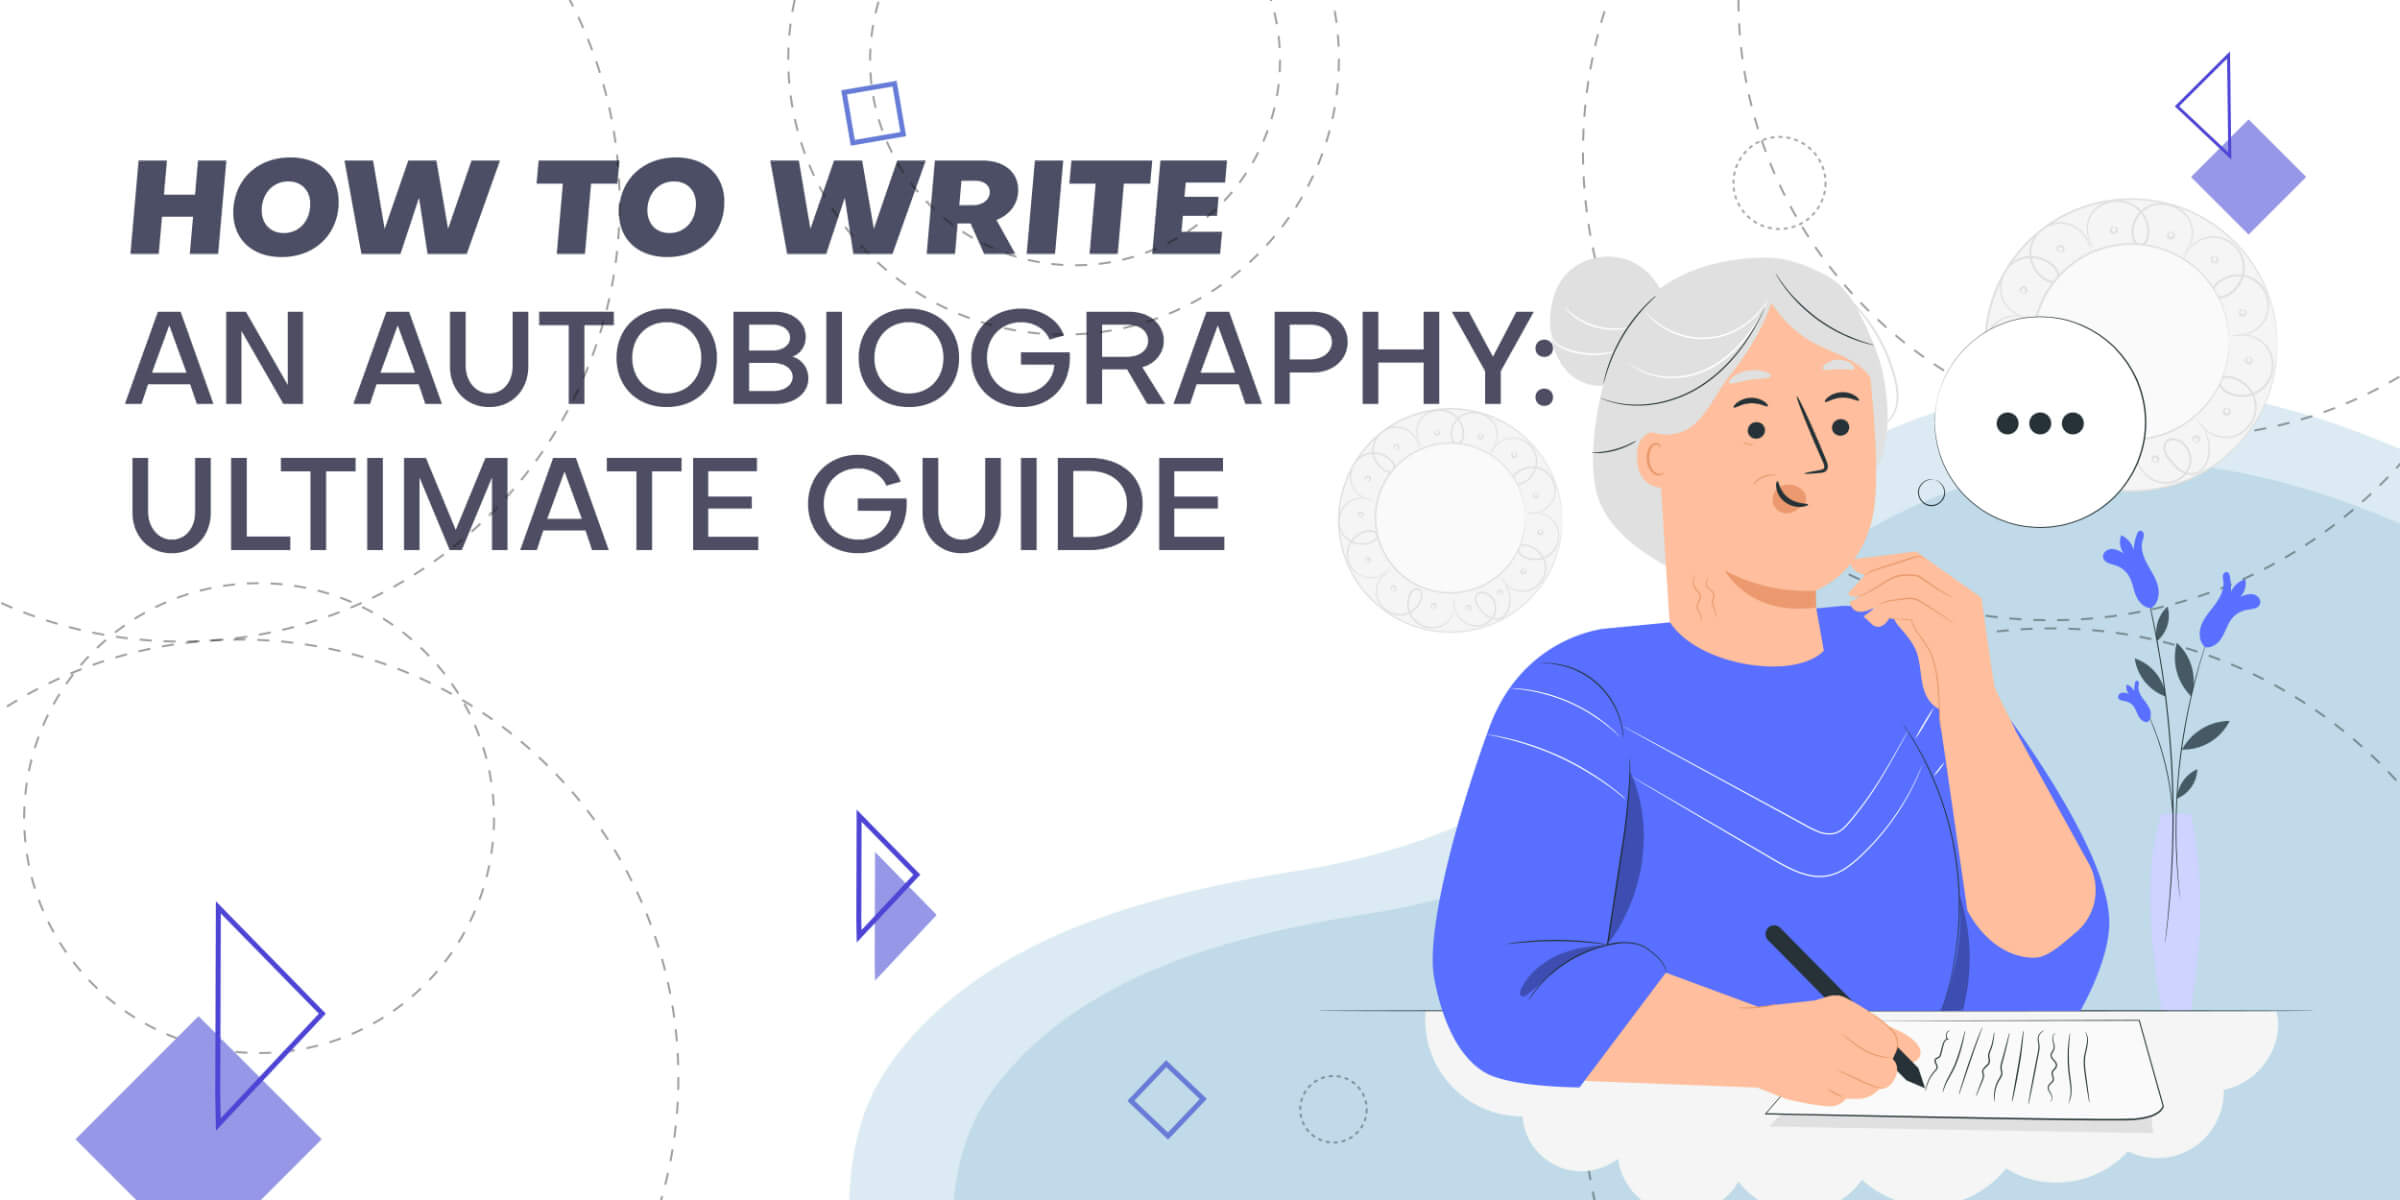 How to Write an Autobiography Guide